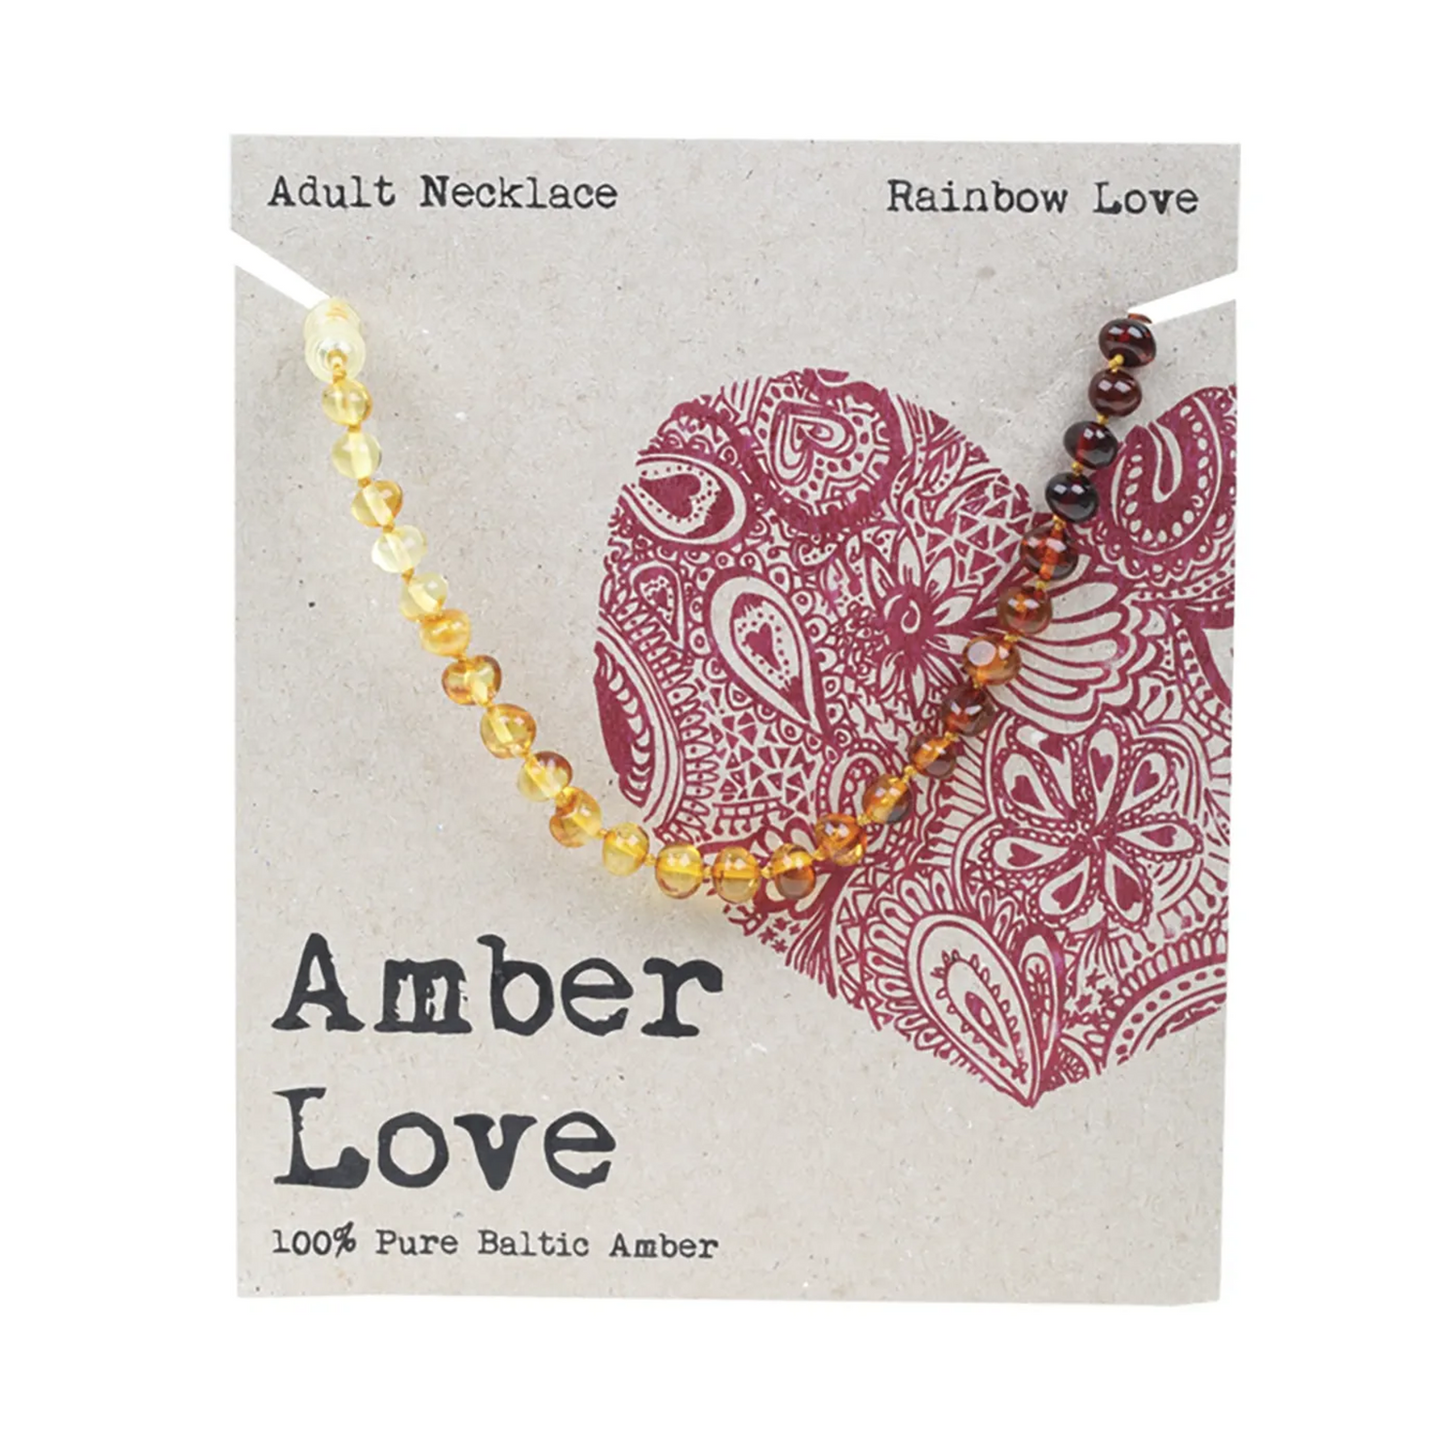 Amber Love 100% Baltic Amber, Adult's Necklace 46cm, Please Choose Your Design